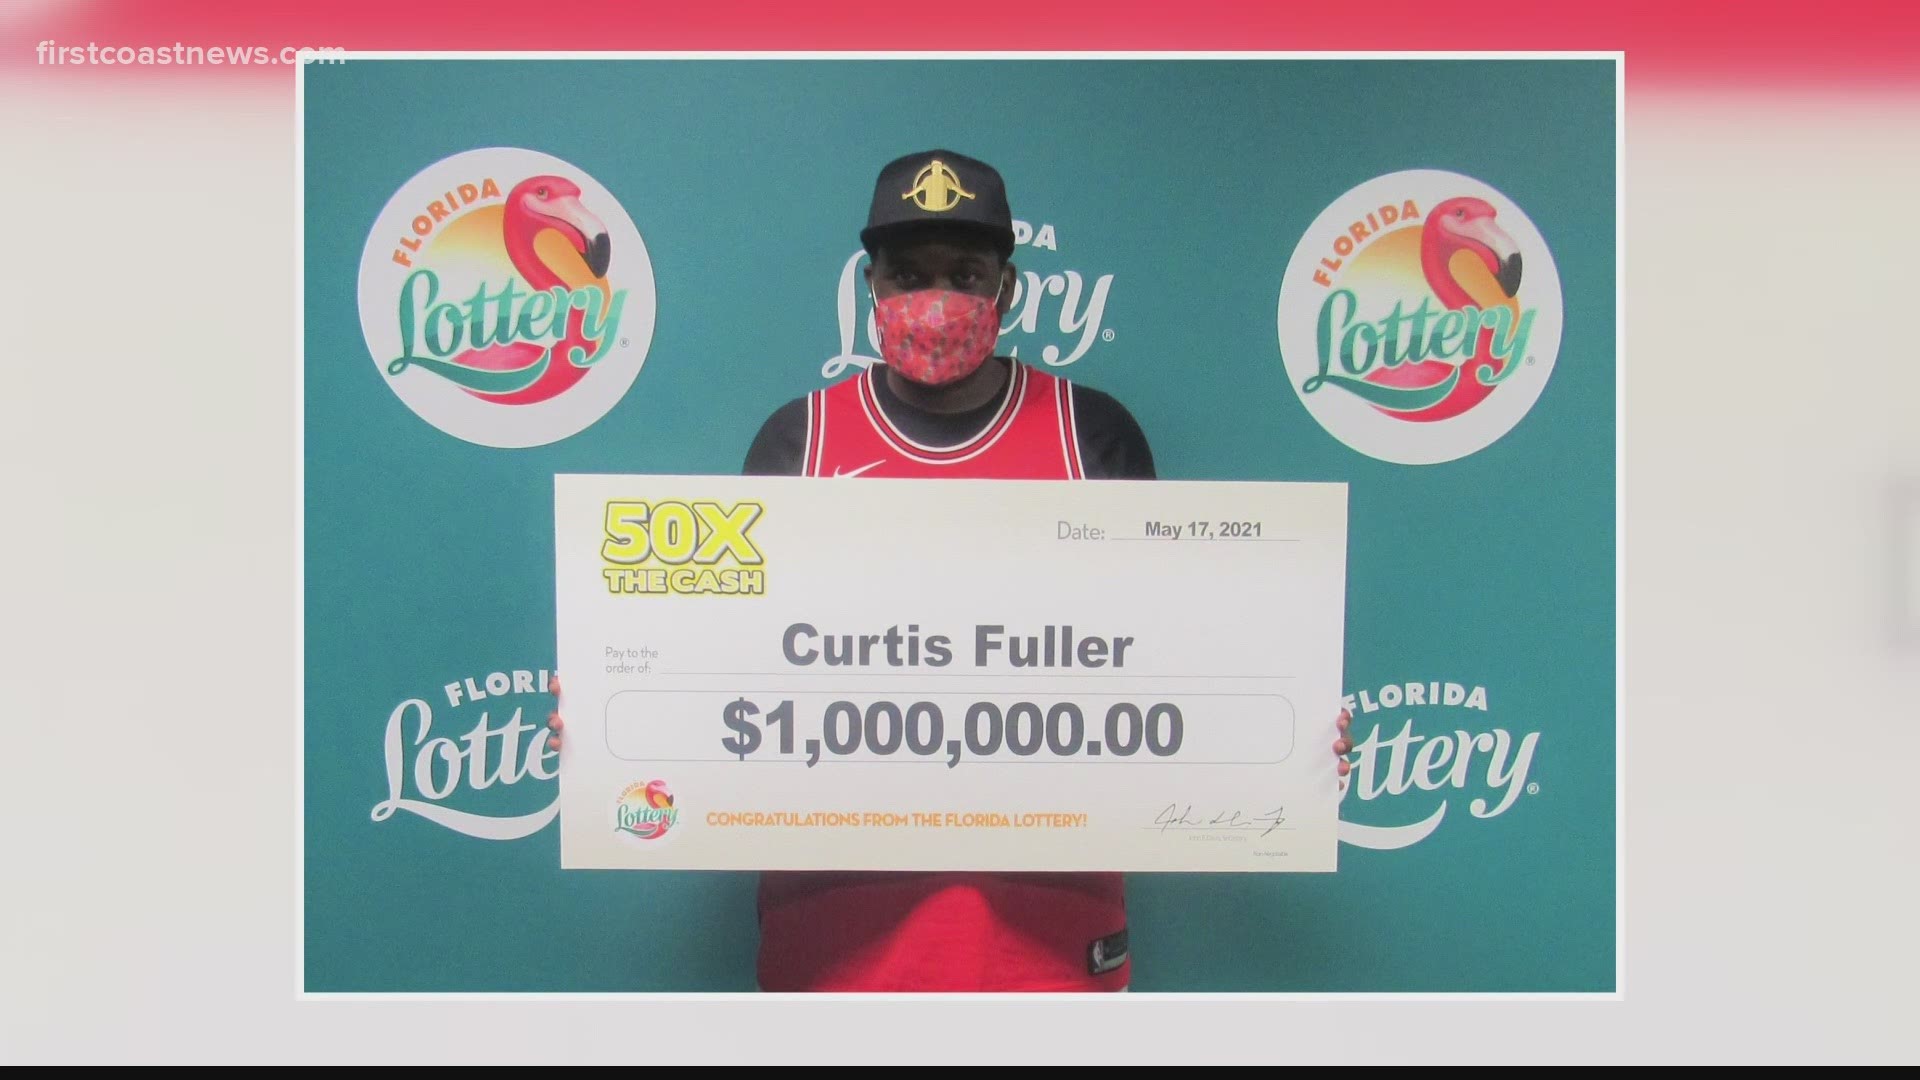 Jacksonville man wins $1 million from Florida Lottery days after his car breaks down